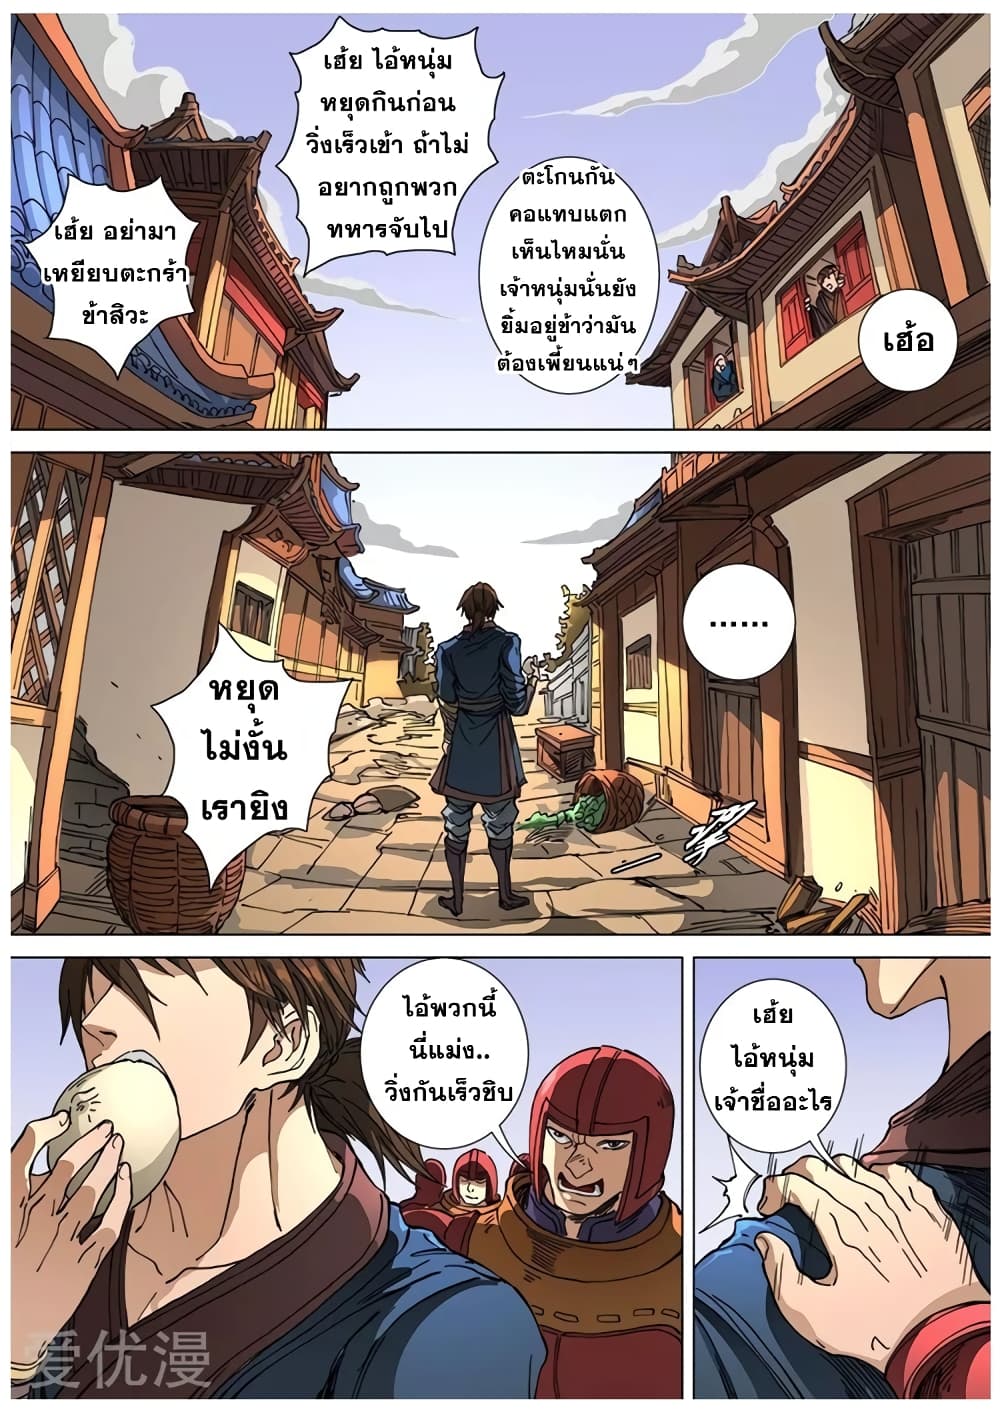 Tangyan in The Other World 108 (13)